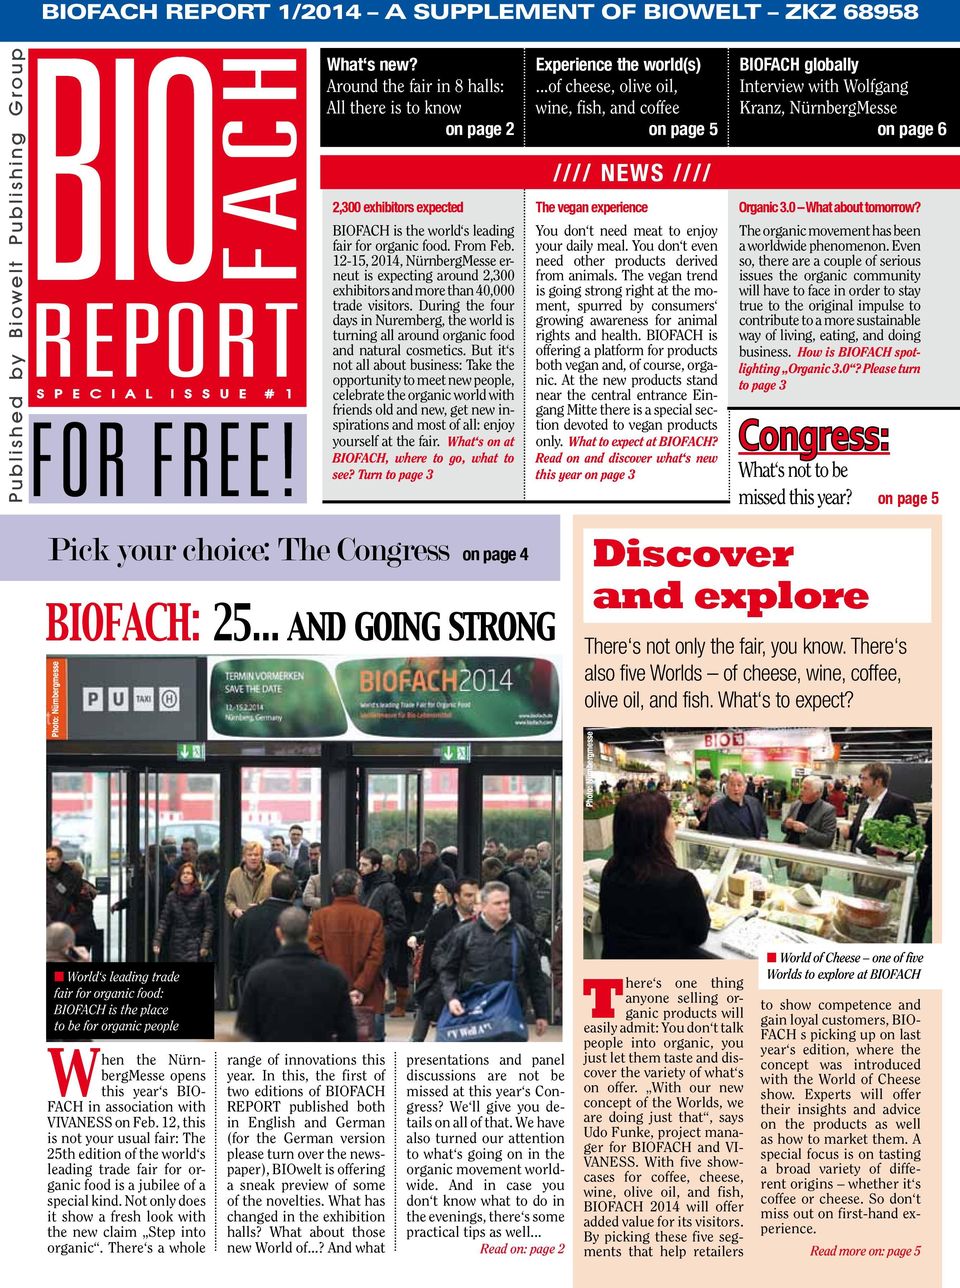 experience Organic 3.0 What about tomorrow? Die aktuelle Messezeitung FOR FREE! BIOFACH is the world s leading fair for organic food. From Feb.